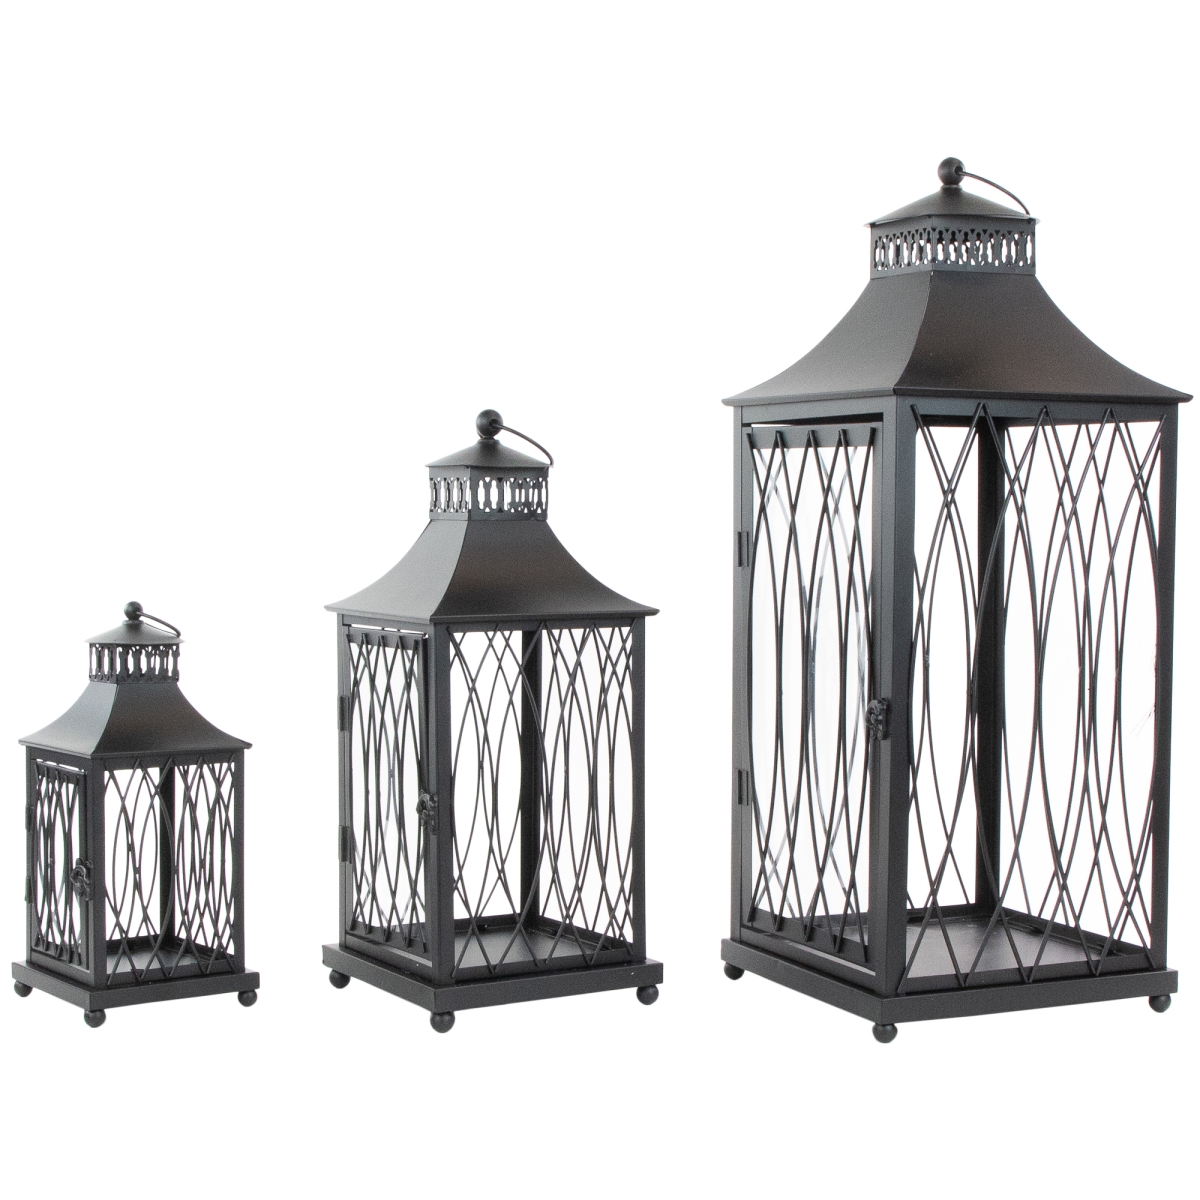 Picture of Northlight 35132873 22.75 in. Lattice Style Candle Lanterns, Black - Set of 3